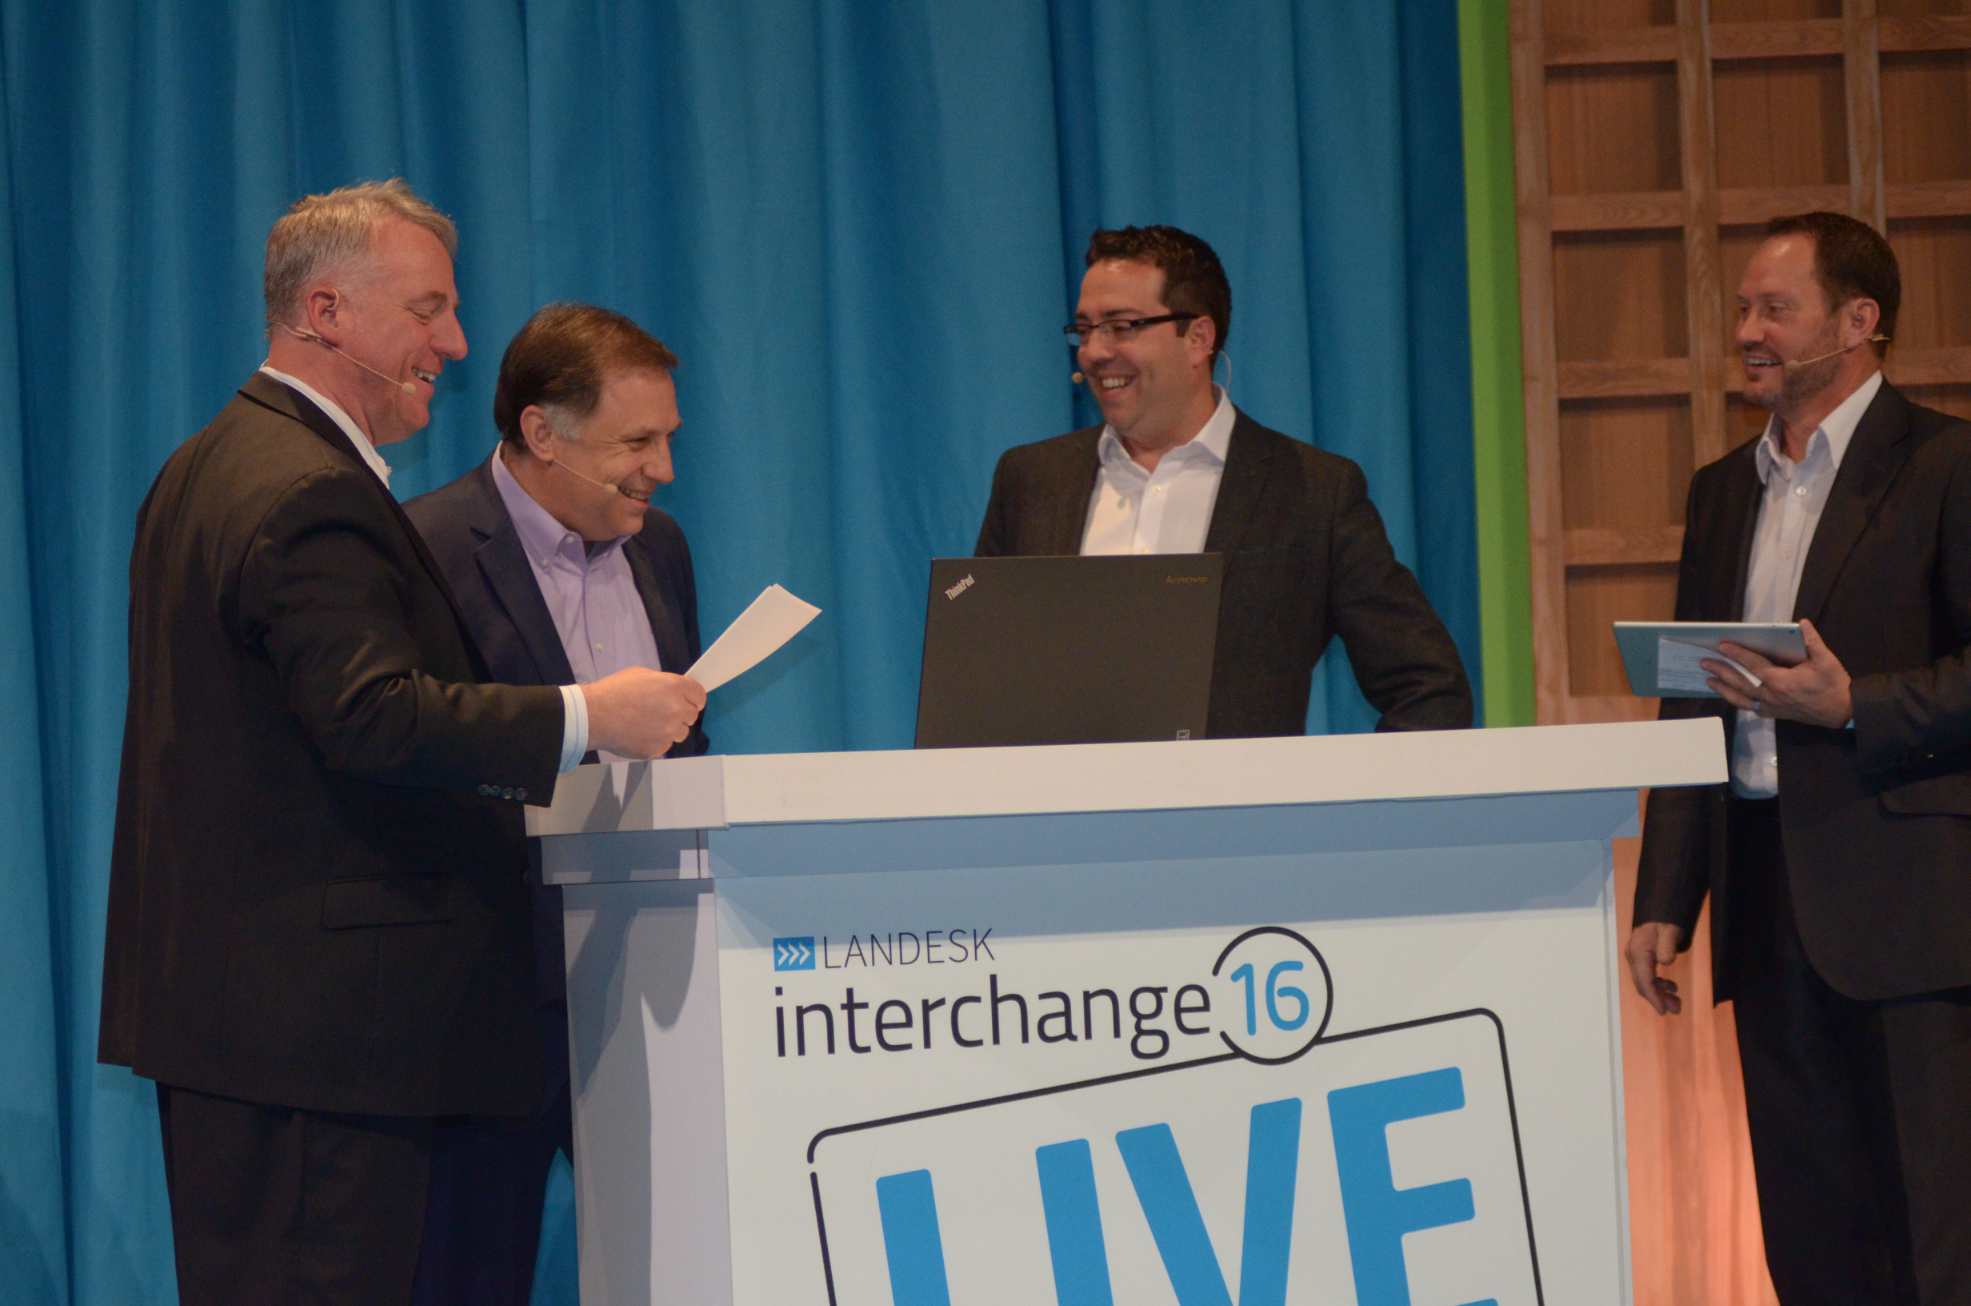 photo from Landesk interchange 16 - speakers up on stage